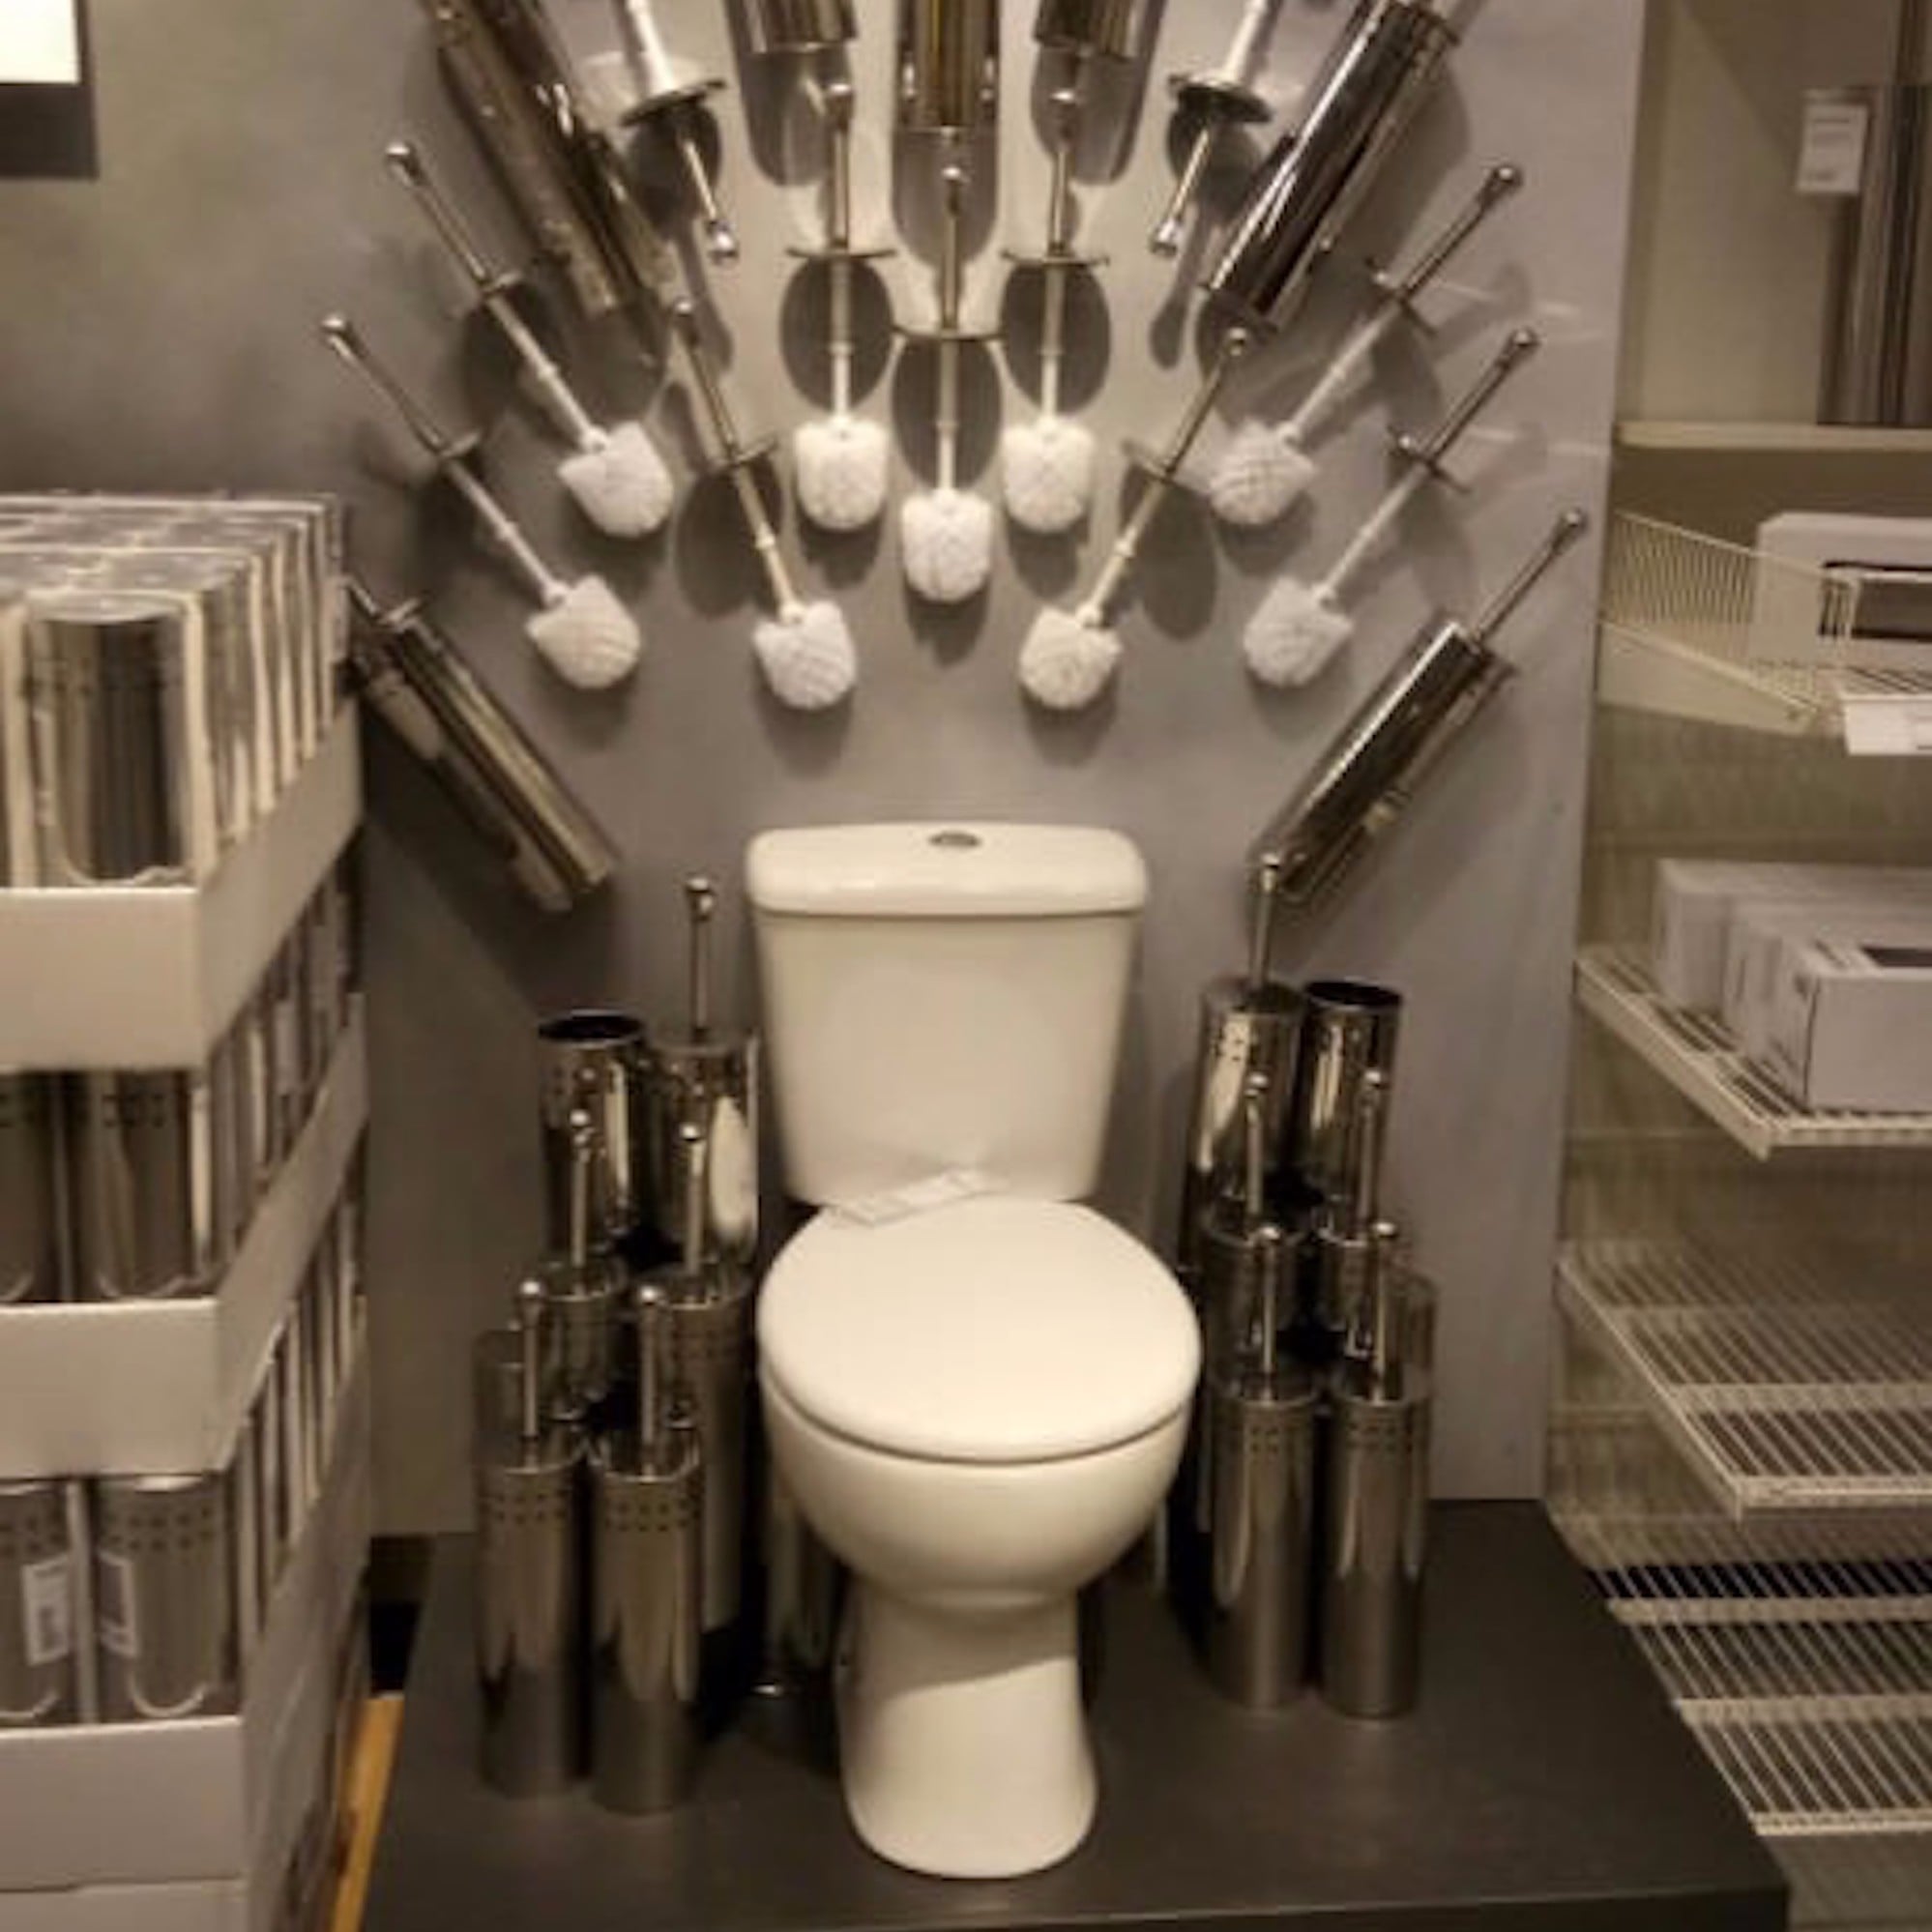 Game Of Thrones Toilet Display At Ikea Popsugar Home,Keeping Up With The Joneses Meaning In Hindi